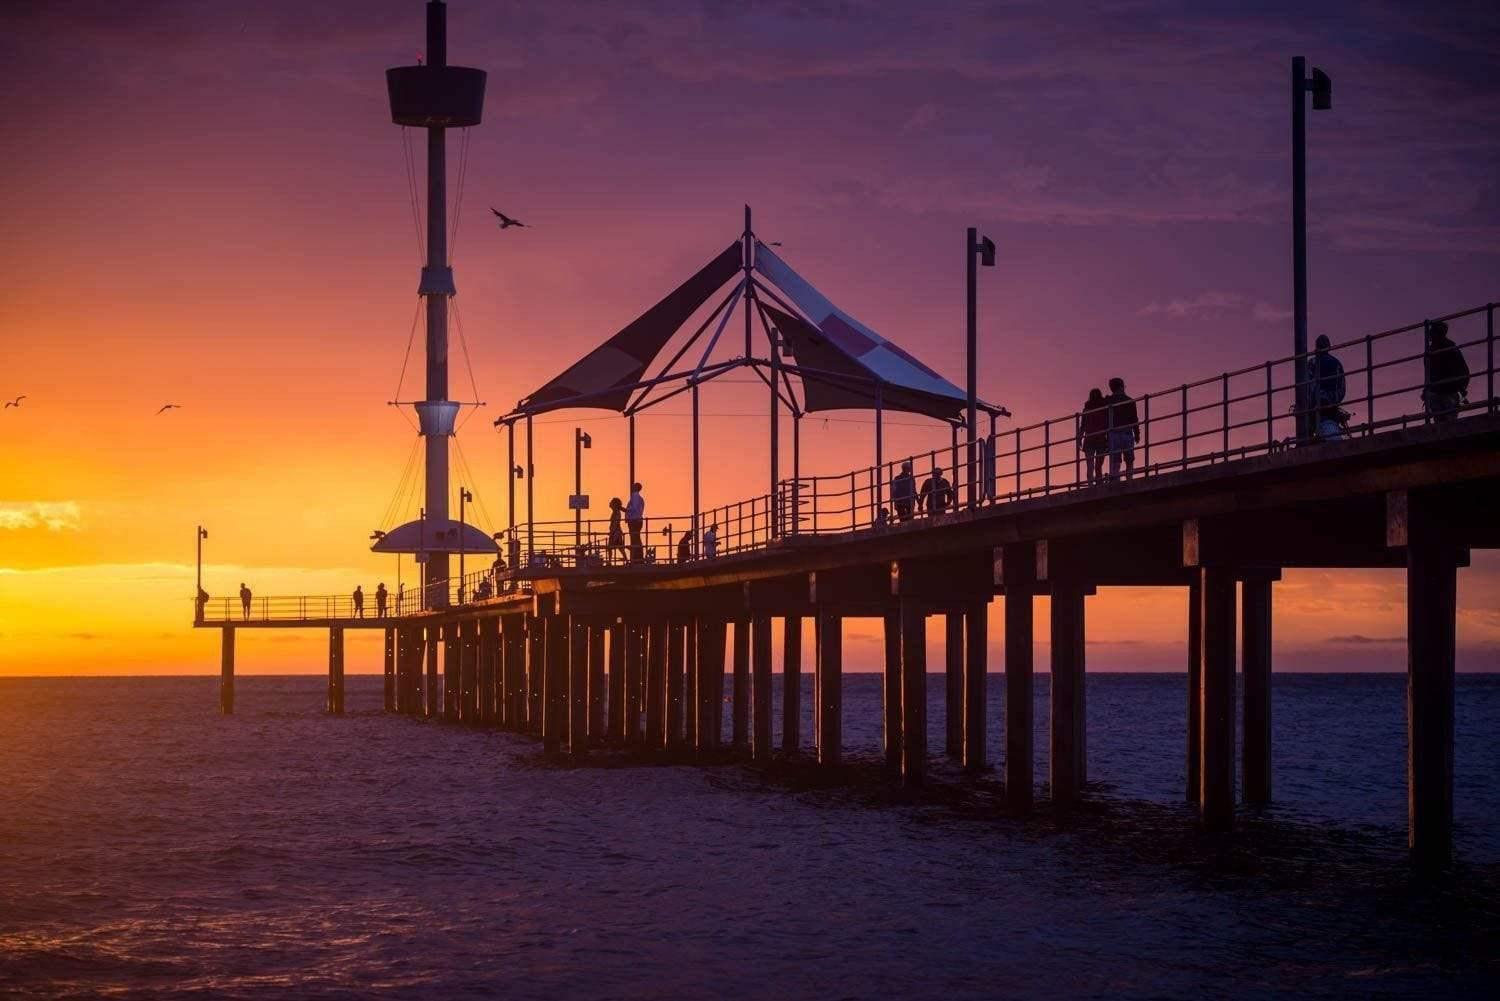 A beautiful view of an over-water bridge with its pillar in the water, some people waling on the bridge and a tent is installed depicting a little cafe on the bridge, Brighton Jetty Sunset - Adelaide SA